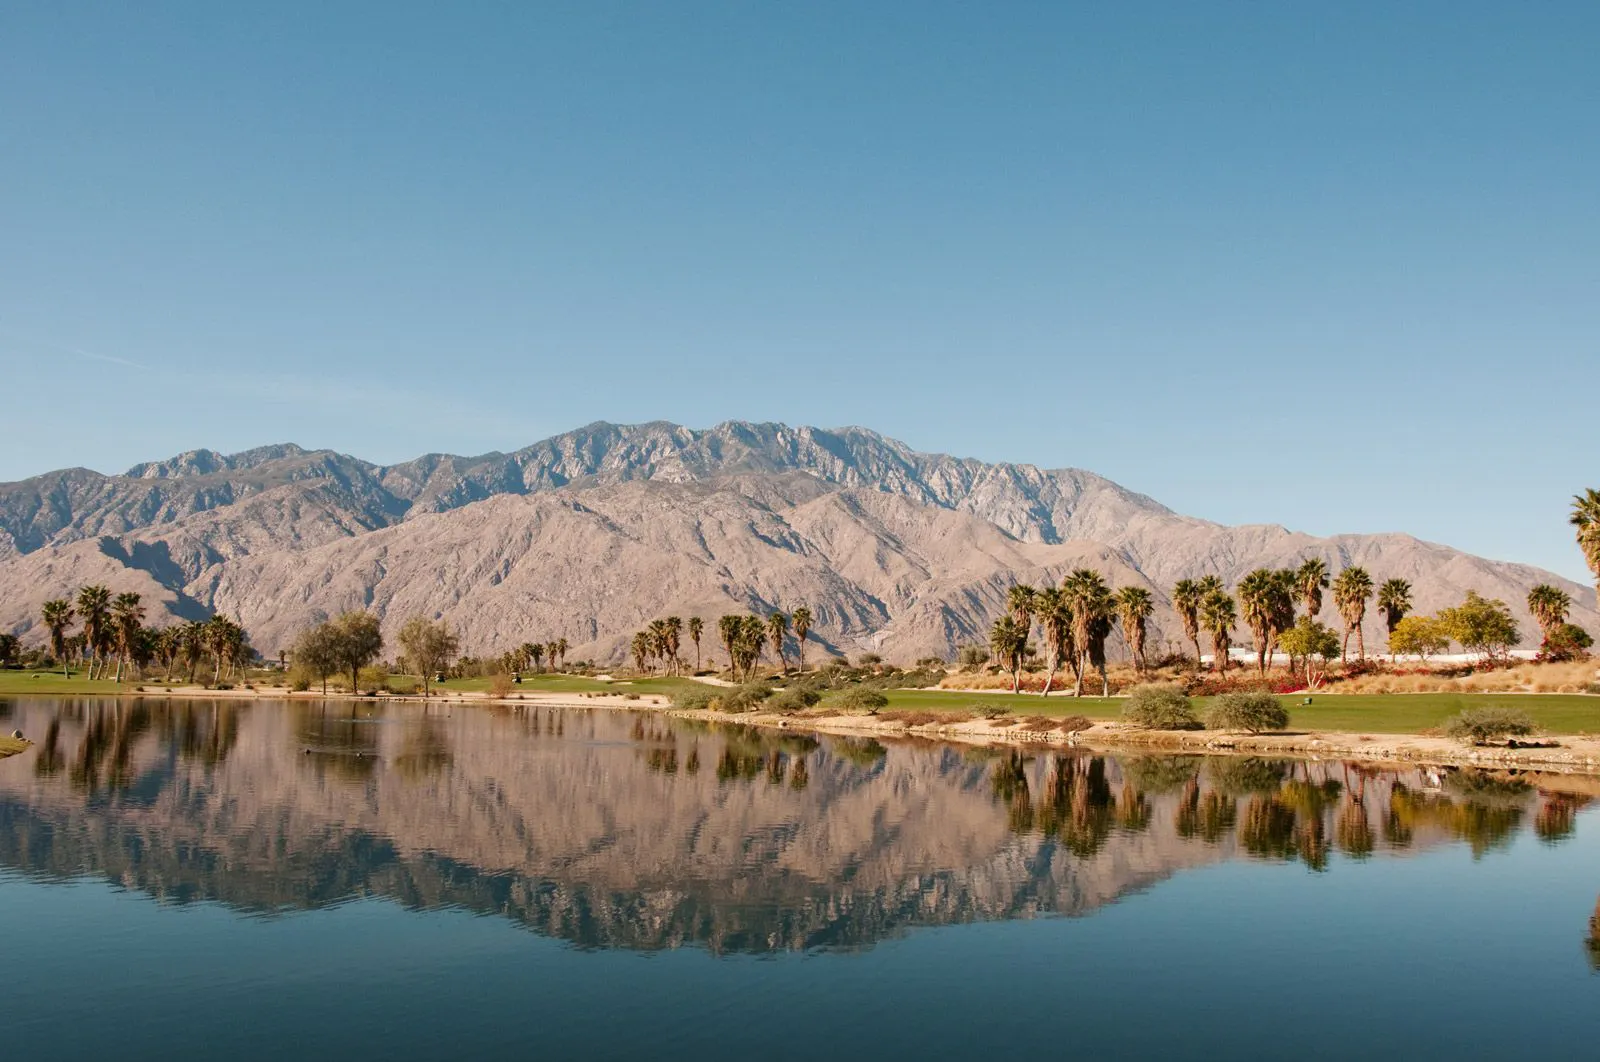 Mountains in Palm Springs reflected in still water with palm trees